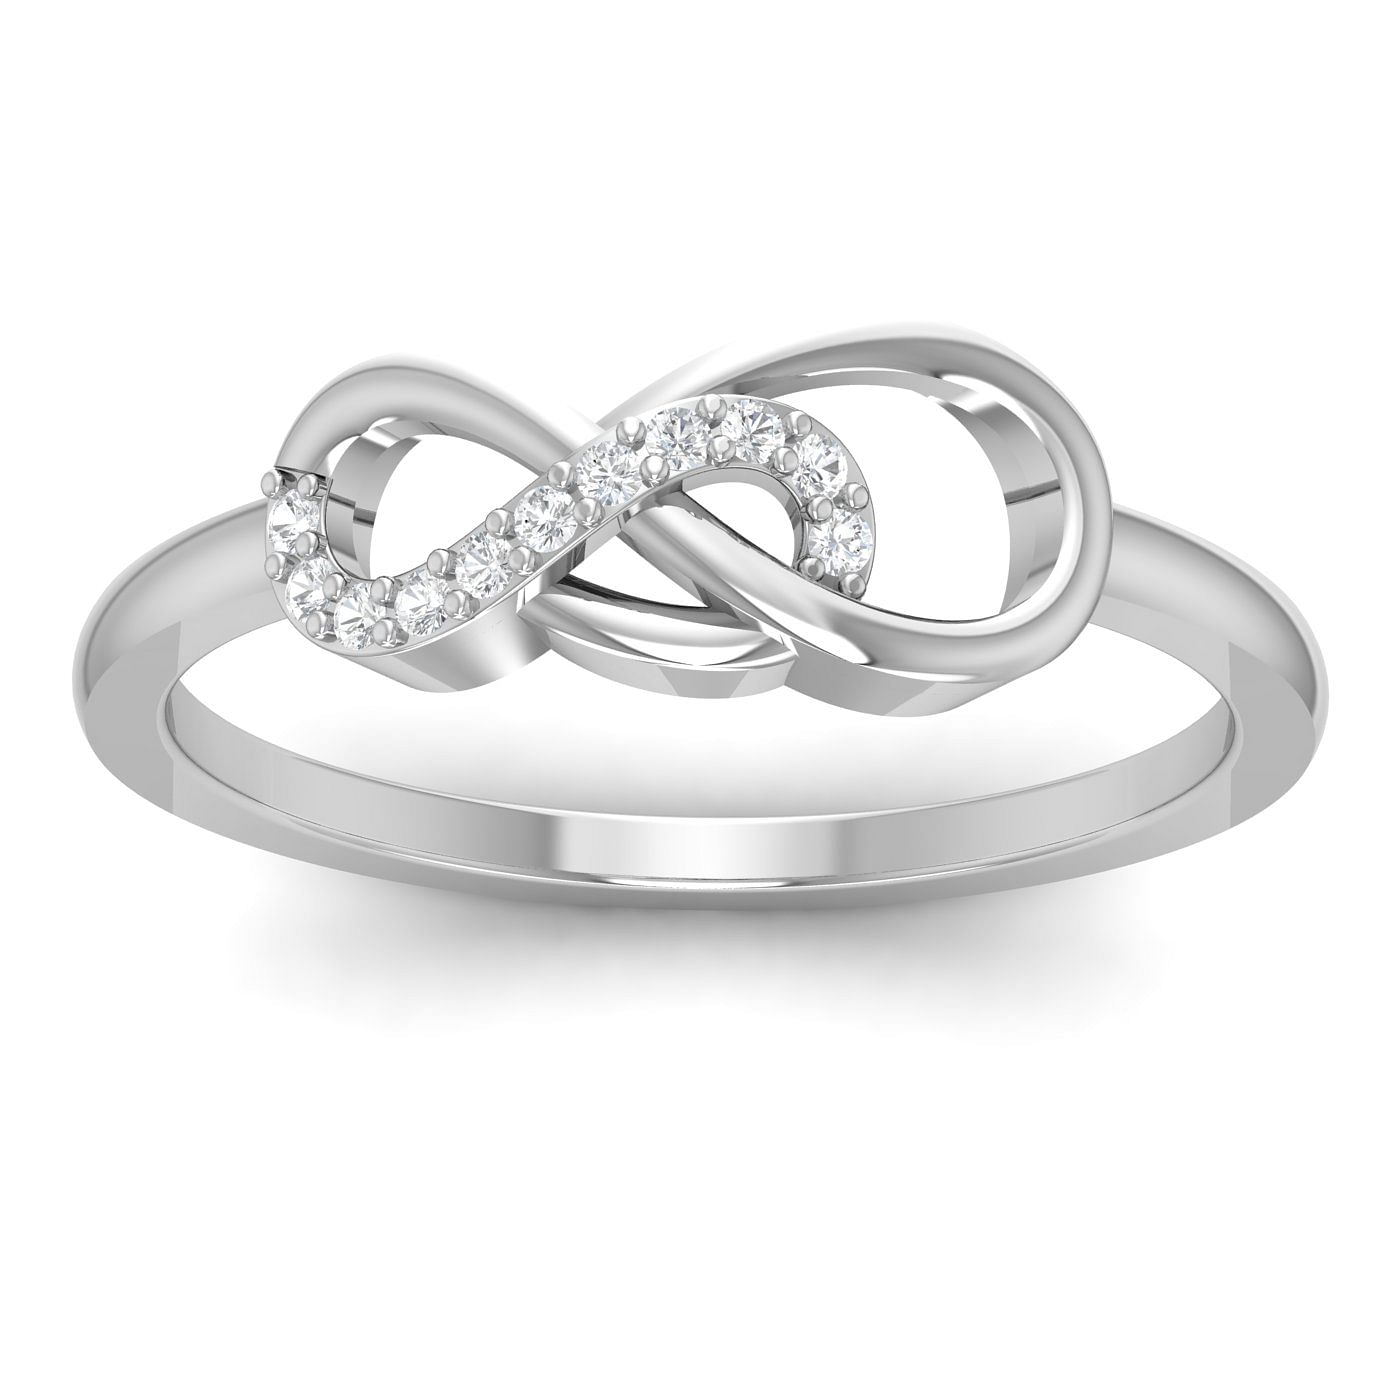 Infinity Crossover Diamond Ring With White Gold For Wife